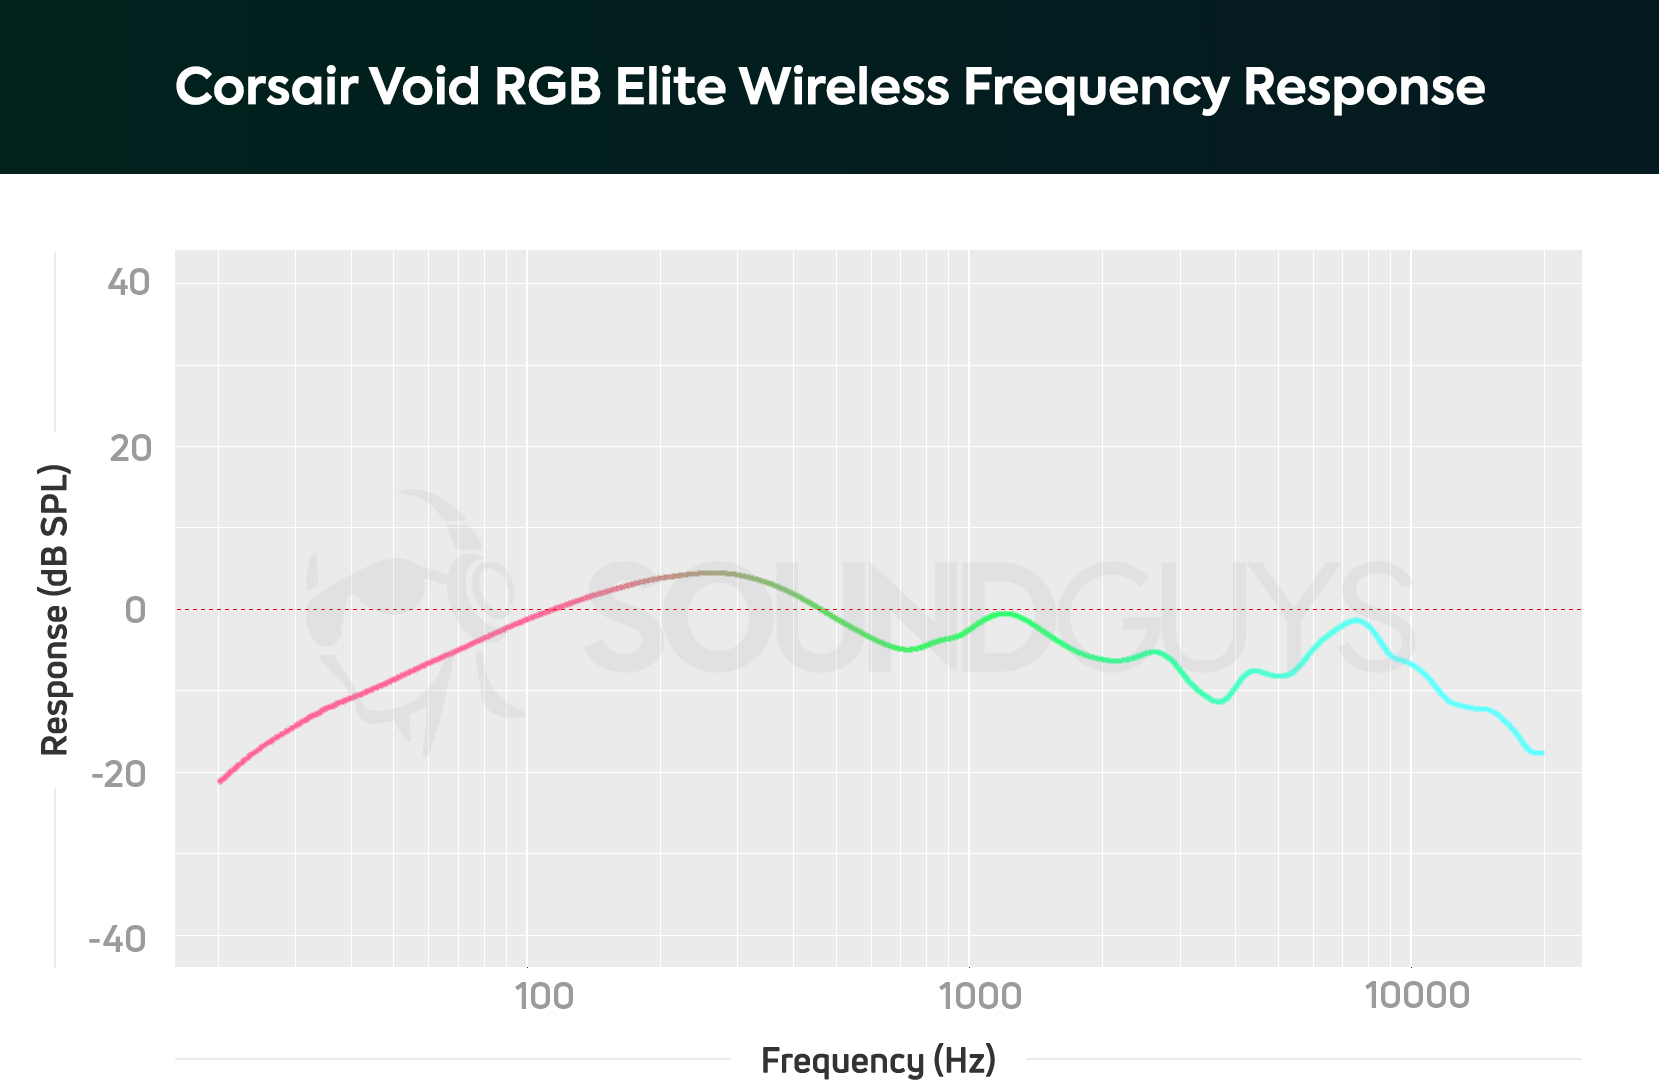 A frequency response chart for the Corsair Void RGB Elite Wireless gaming headset